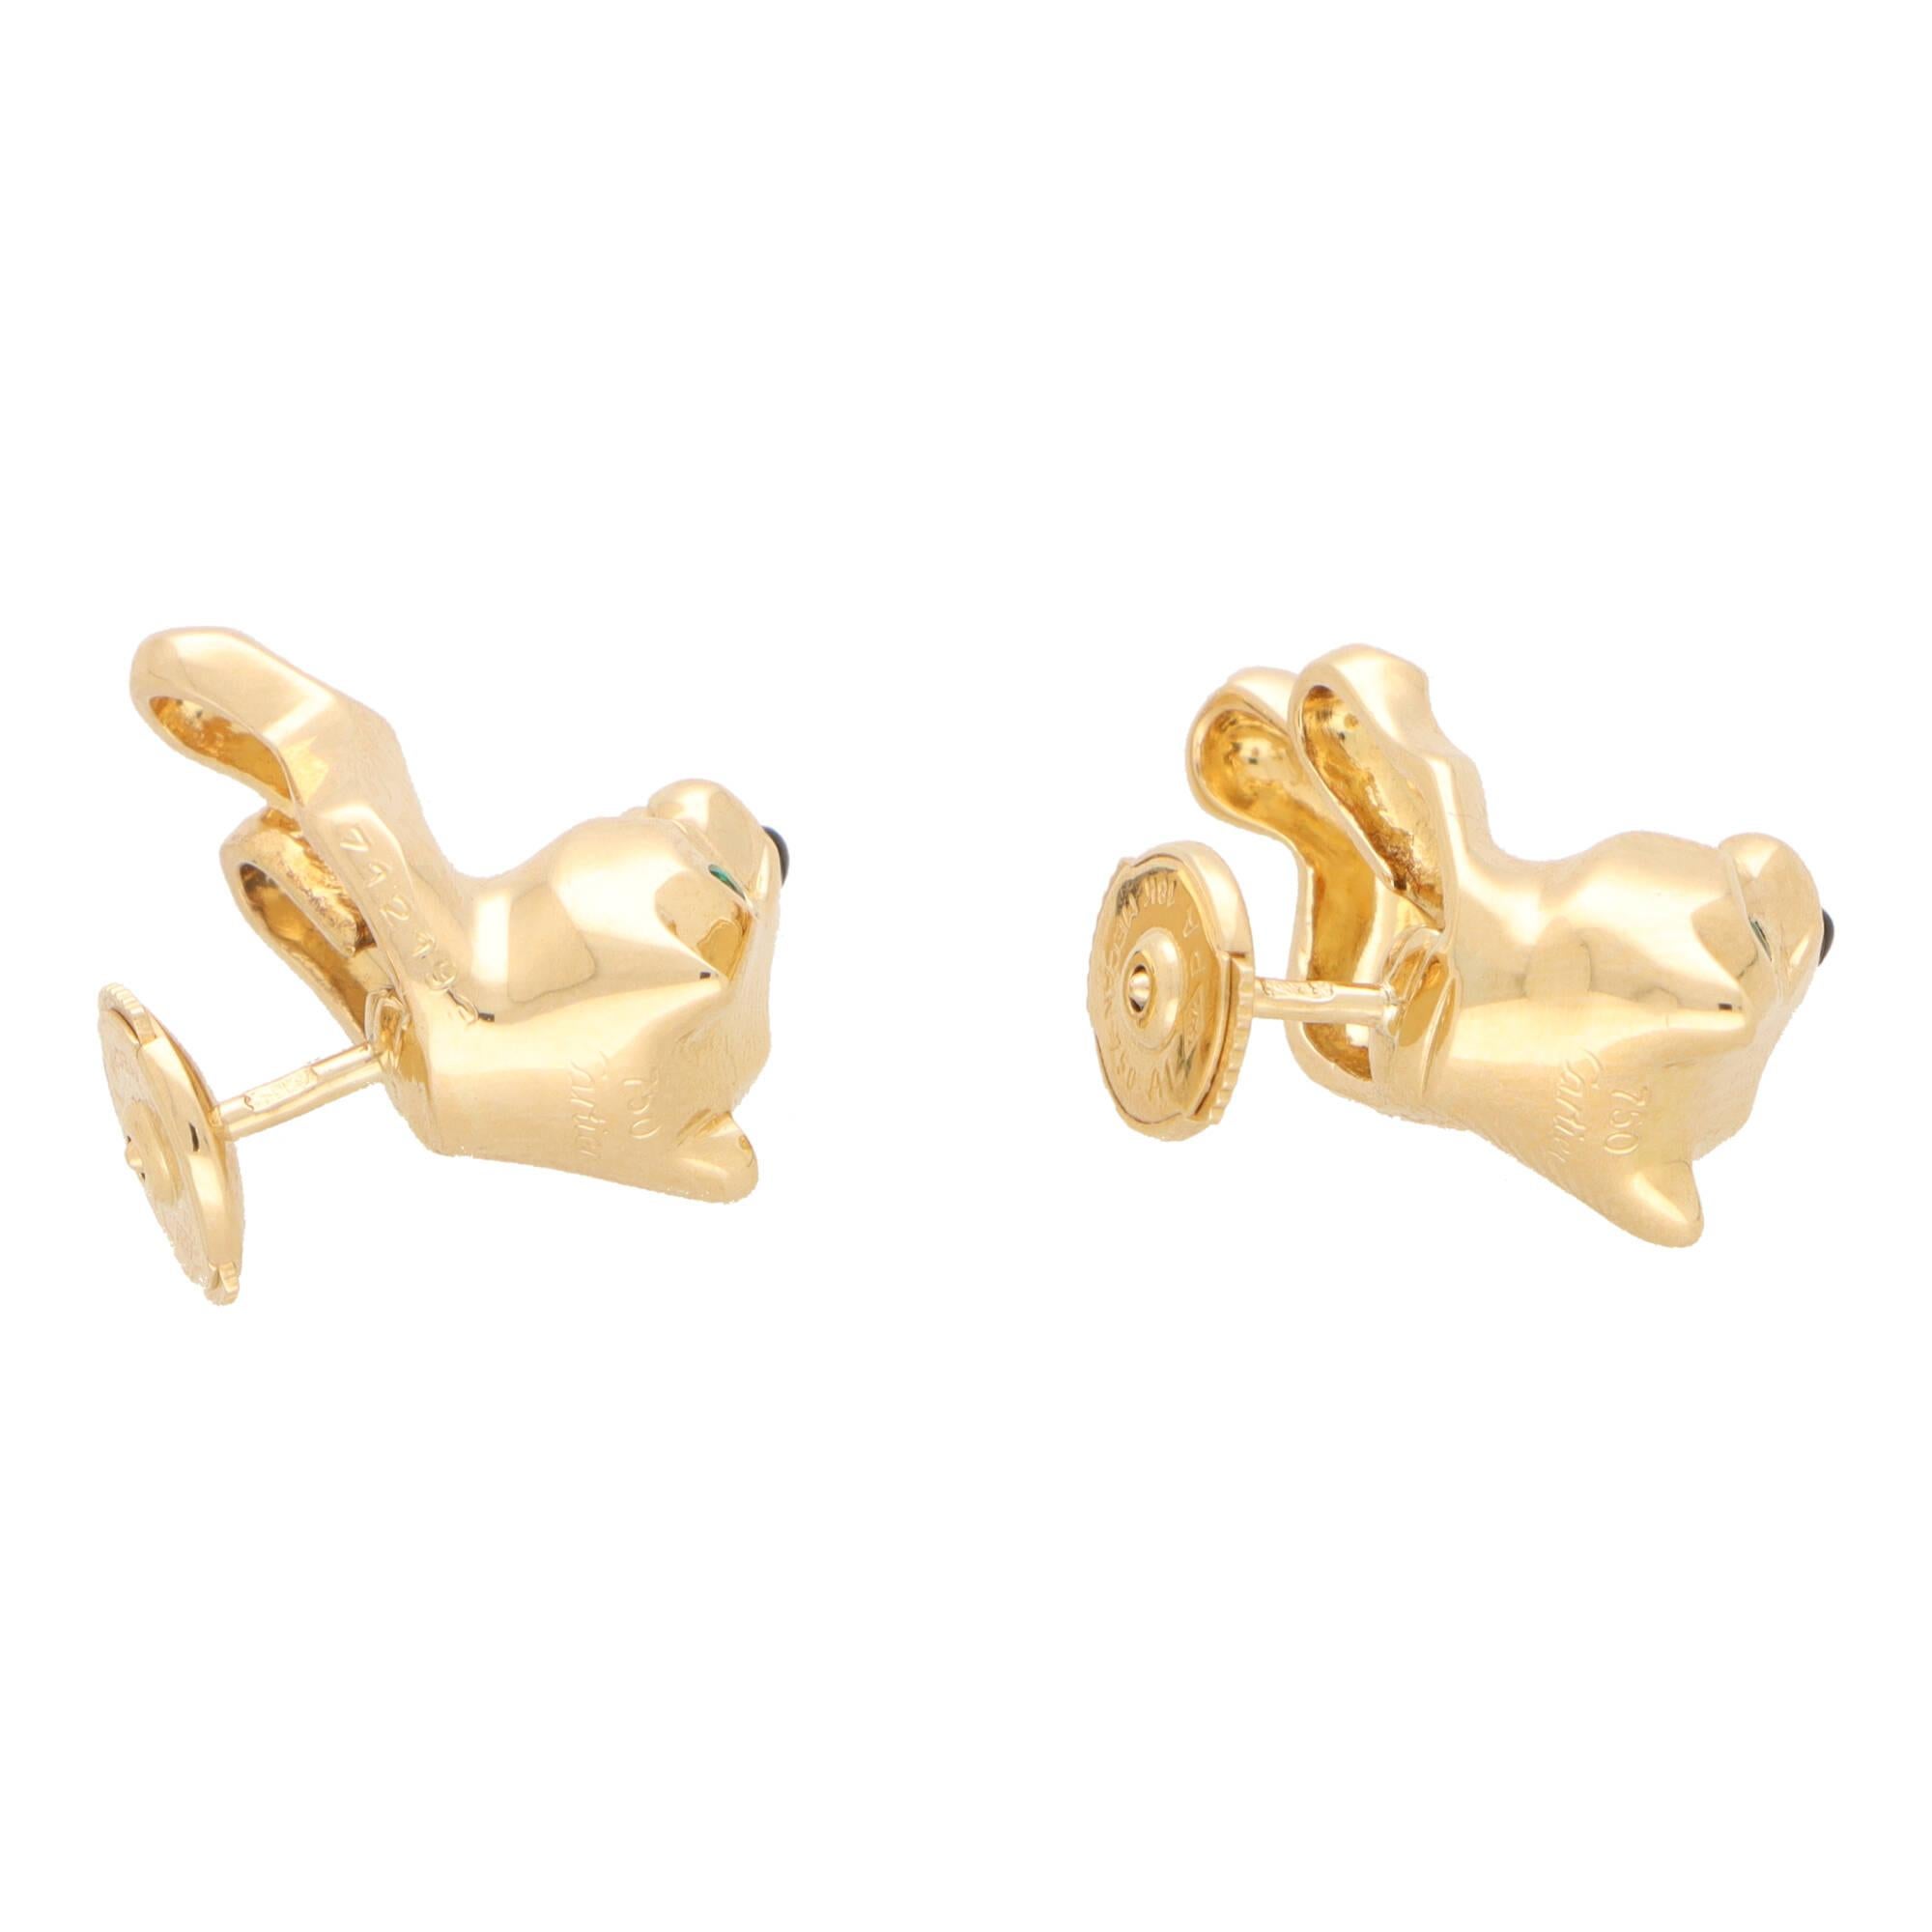 Pear Cut Vintage Cartier Panther Earrings Set in 18k Yellow Gold